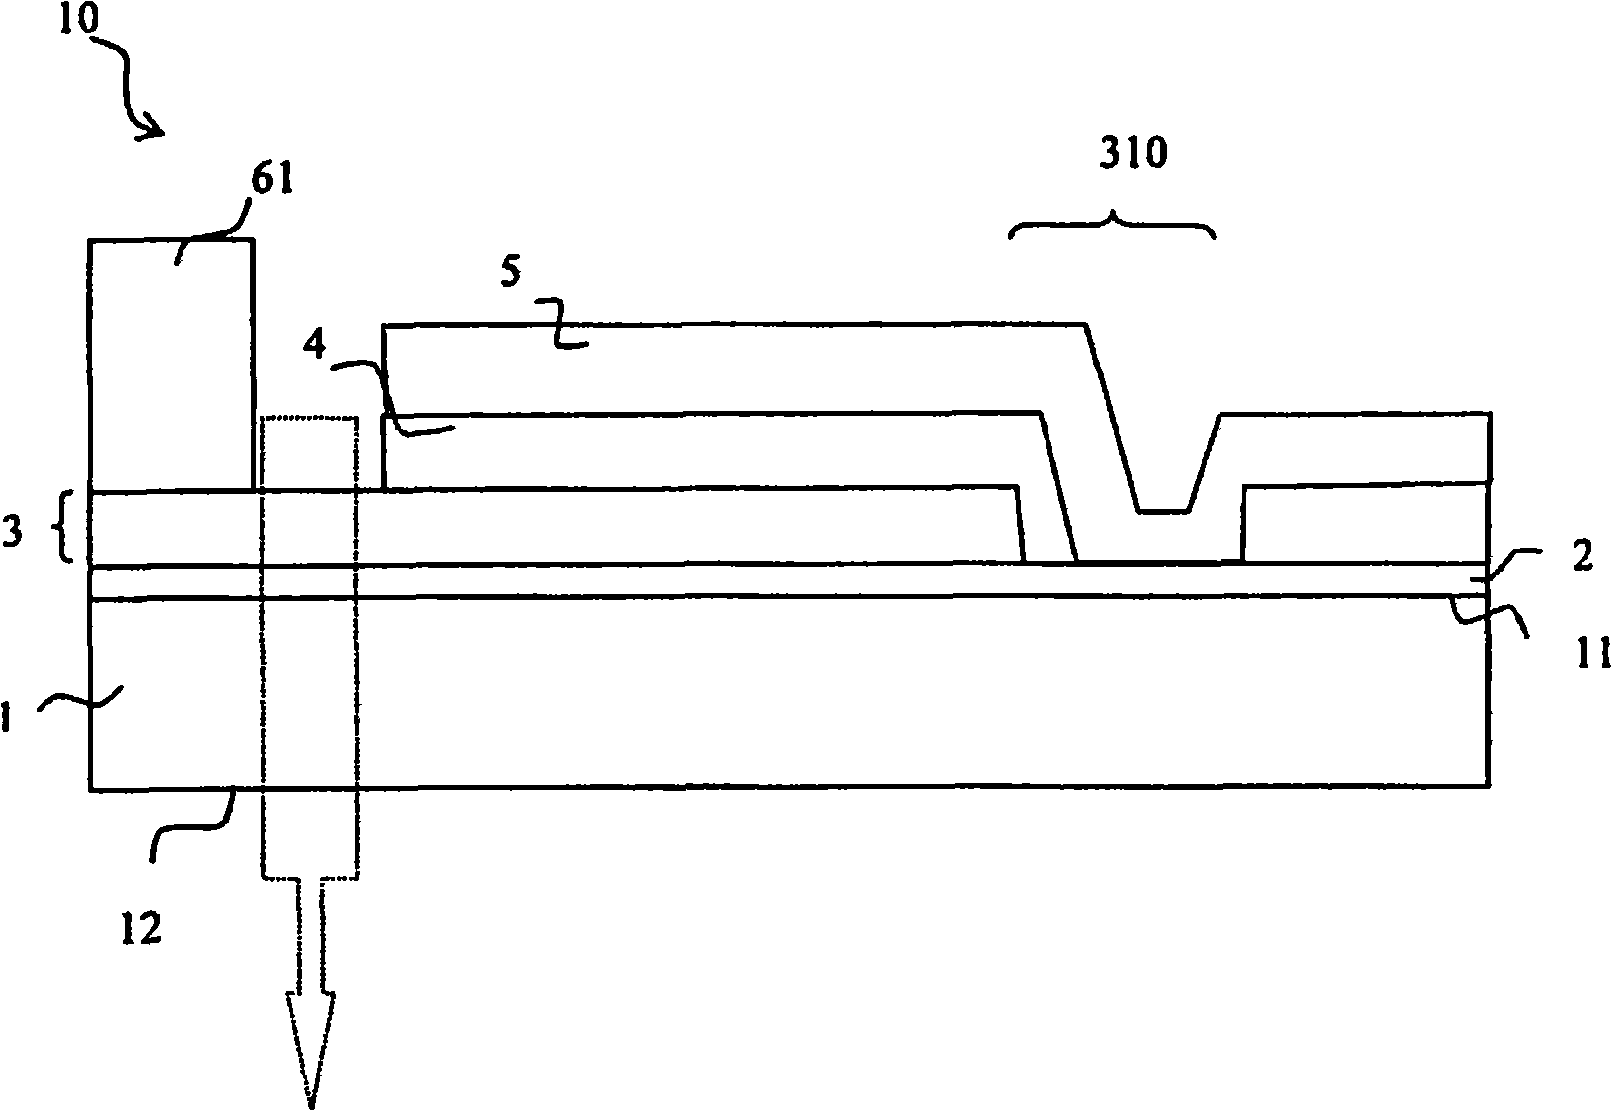 Substrate for an organic light-emitting device, use and process for manufacturing this substrate, and organic light-emitting device